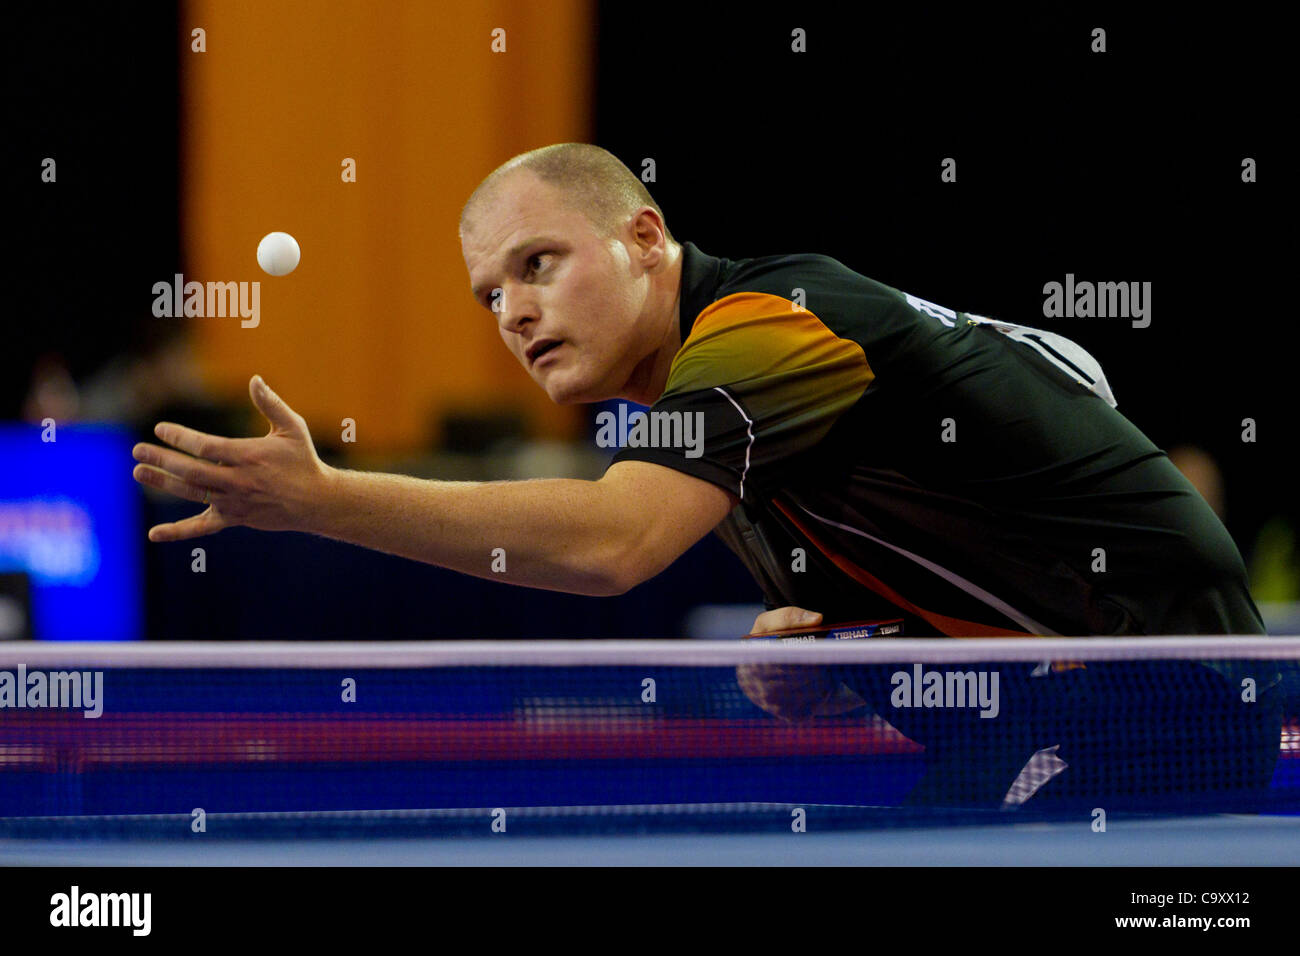 EINDHOVEN, THE NETHERLANDS, 03/03/2012. Table tennis player Barry Weijers (pictured) wins his match against Gerard Bakker at the Dutch table tennis championships 2012 in Eindhoven. Stock Photo